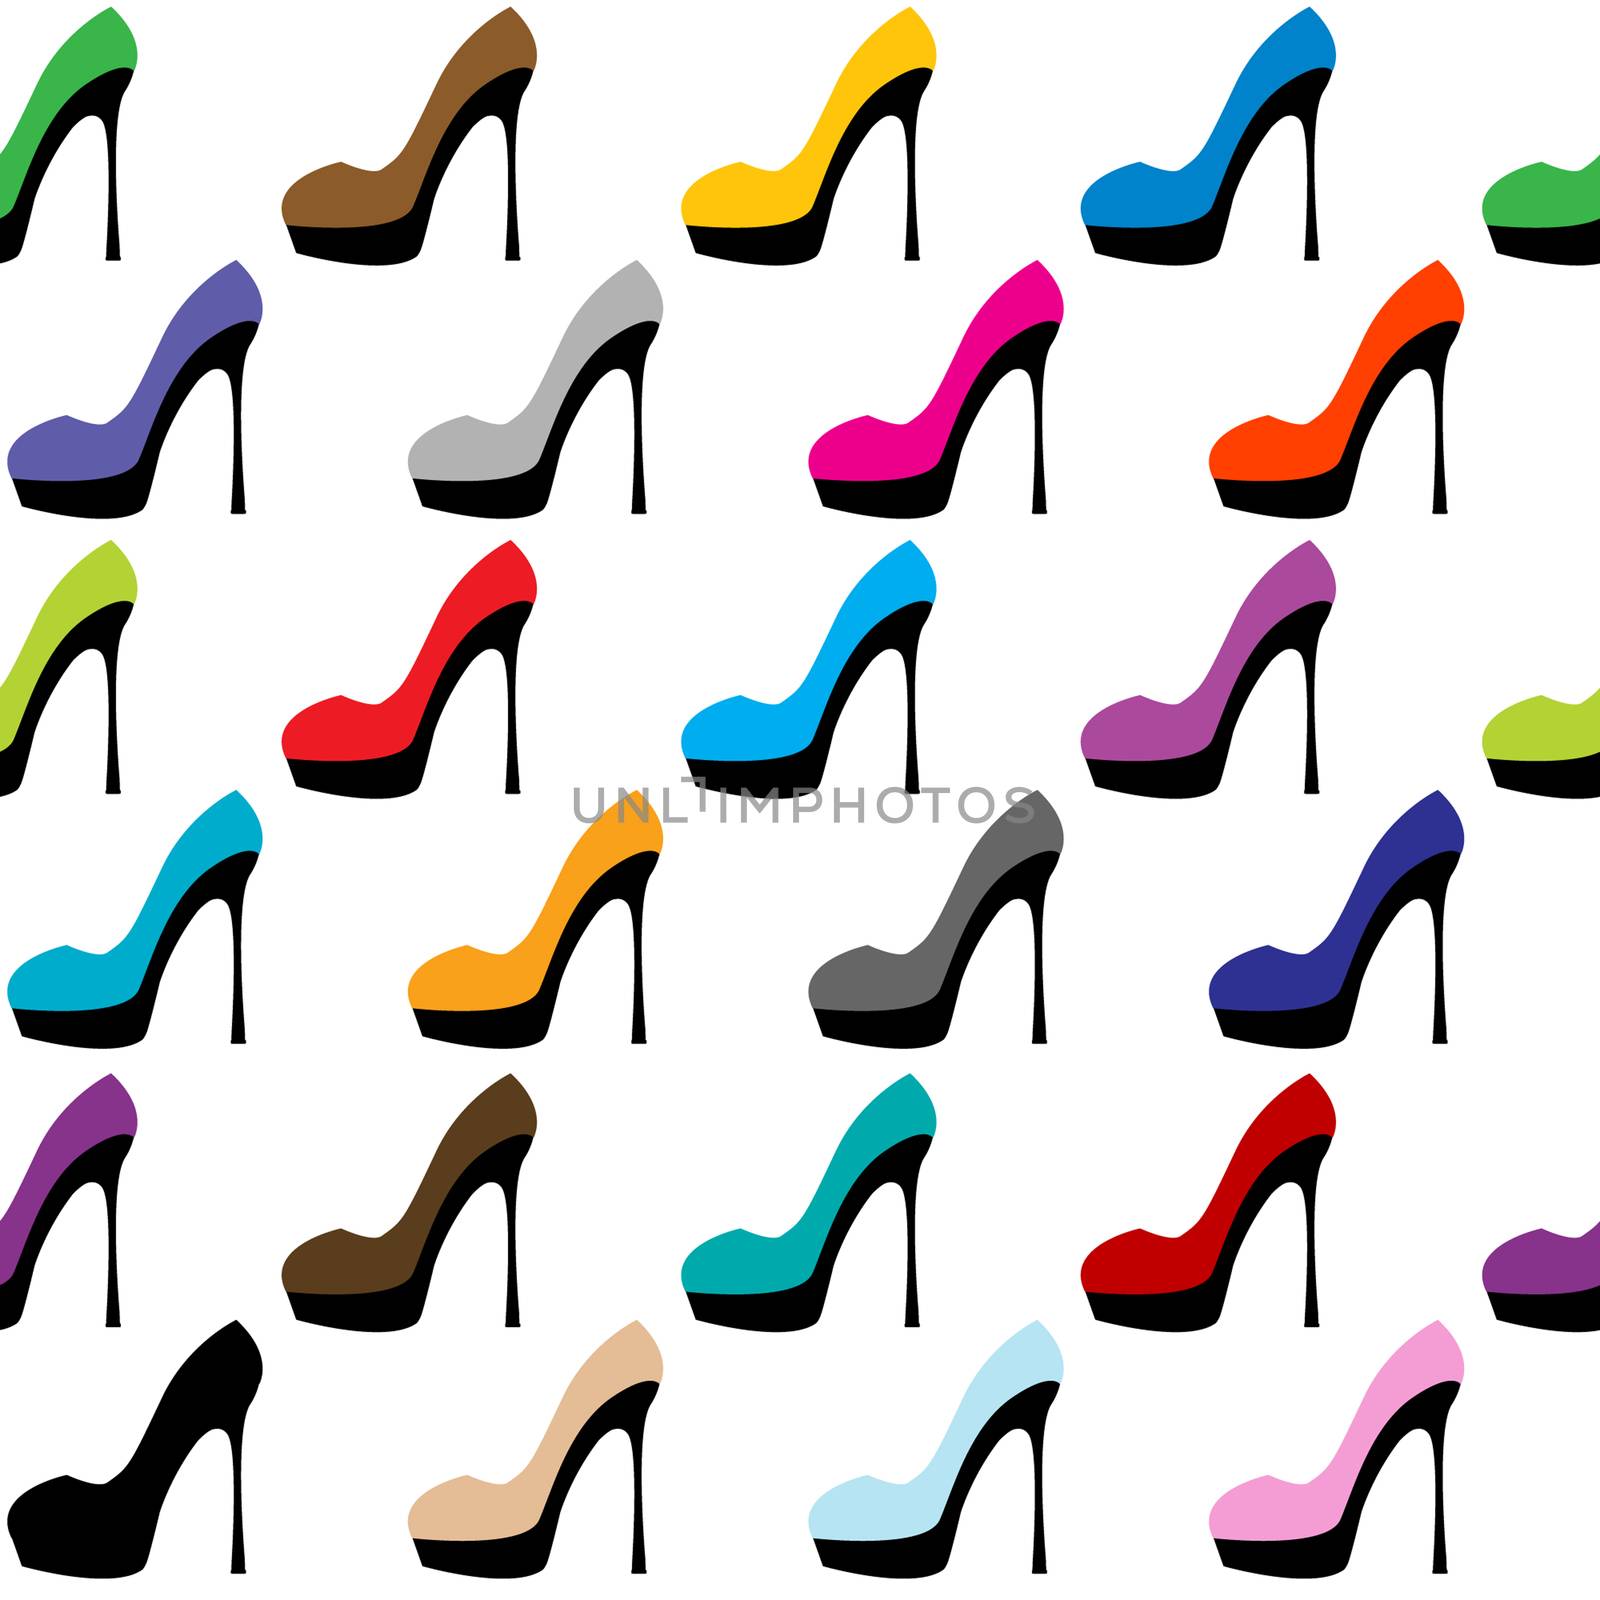 Colorful shoes with high heels seamless background